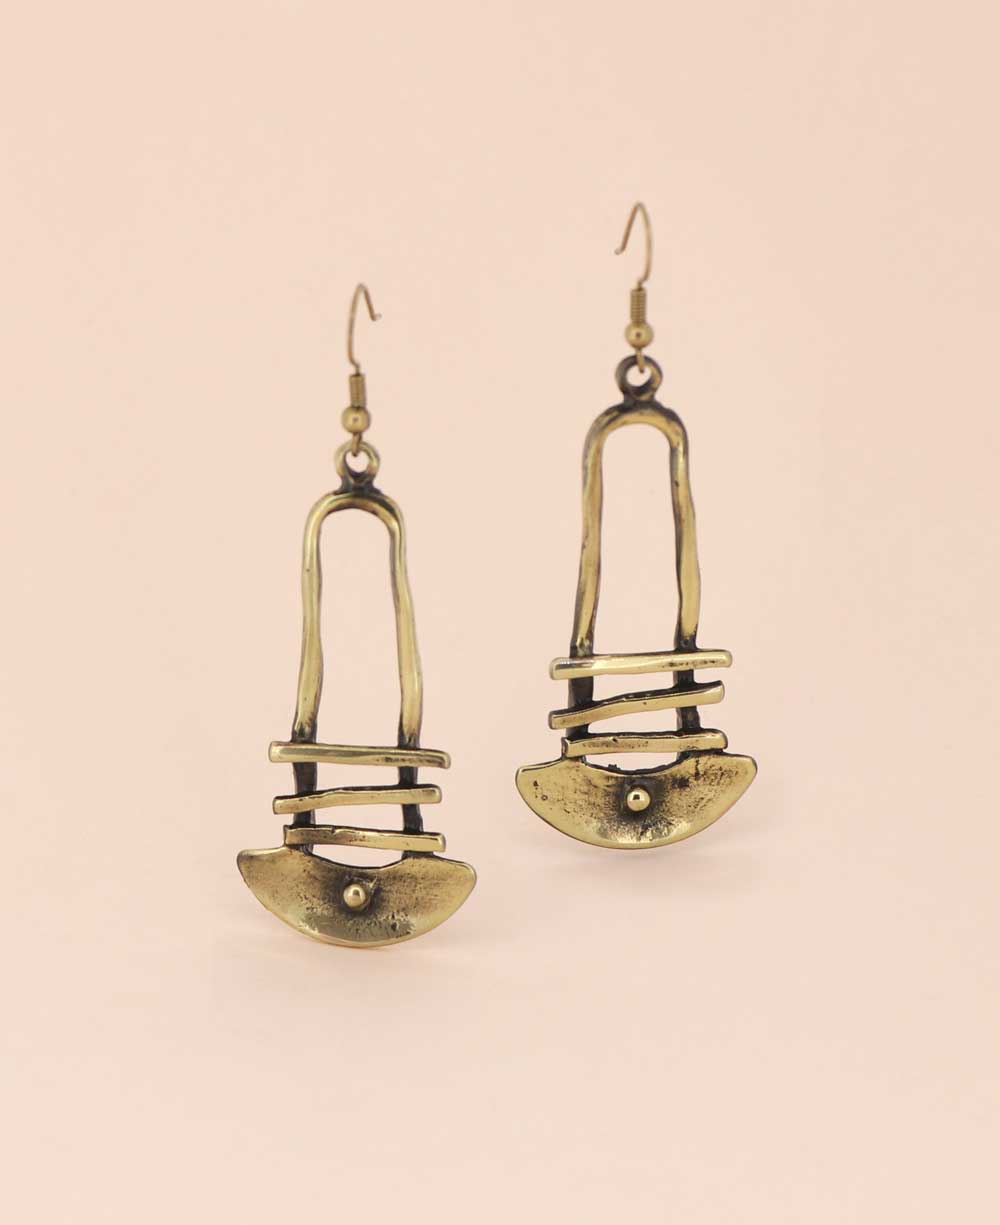 Bronze Fish Hook Earrings with Antique Finish